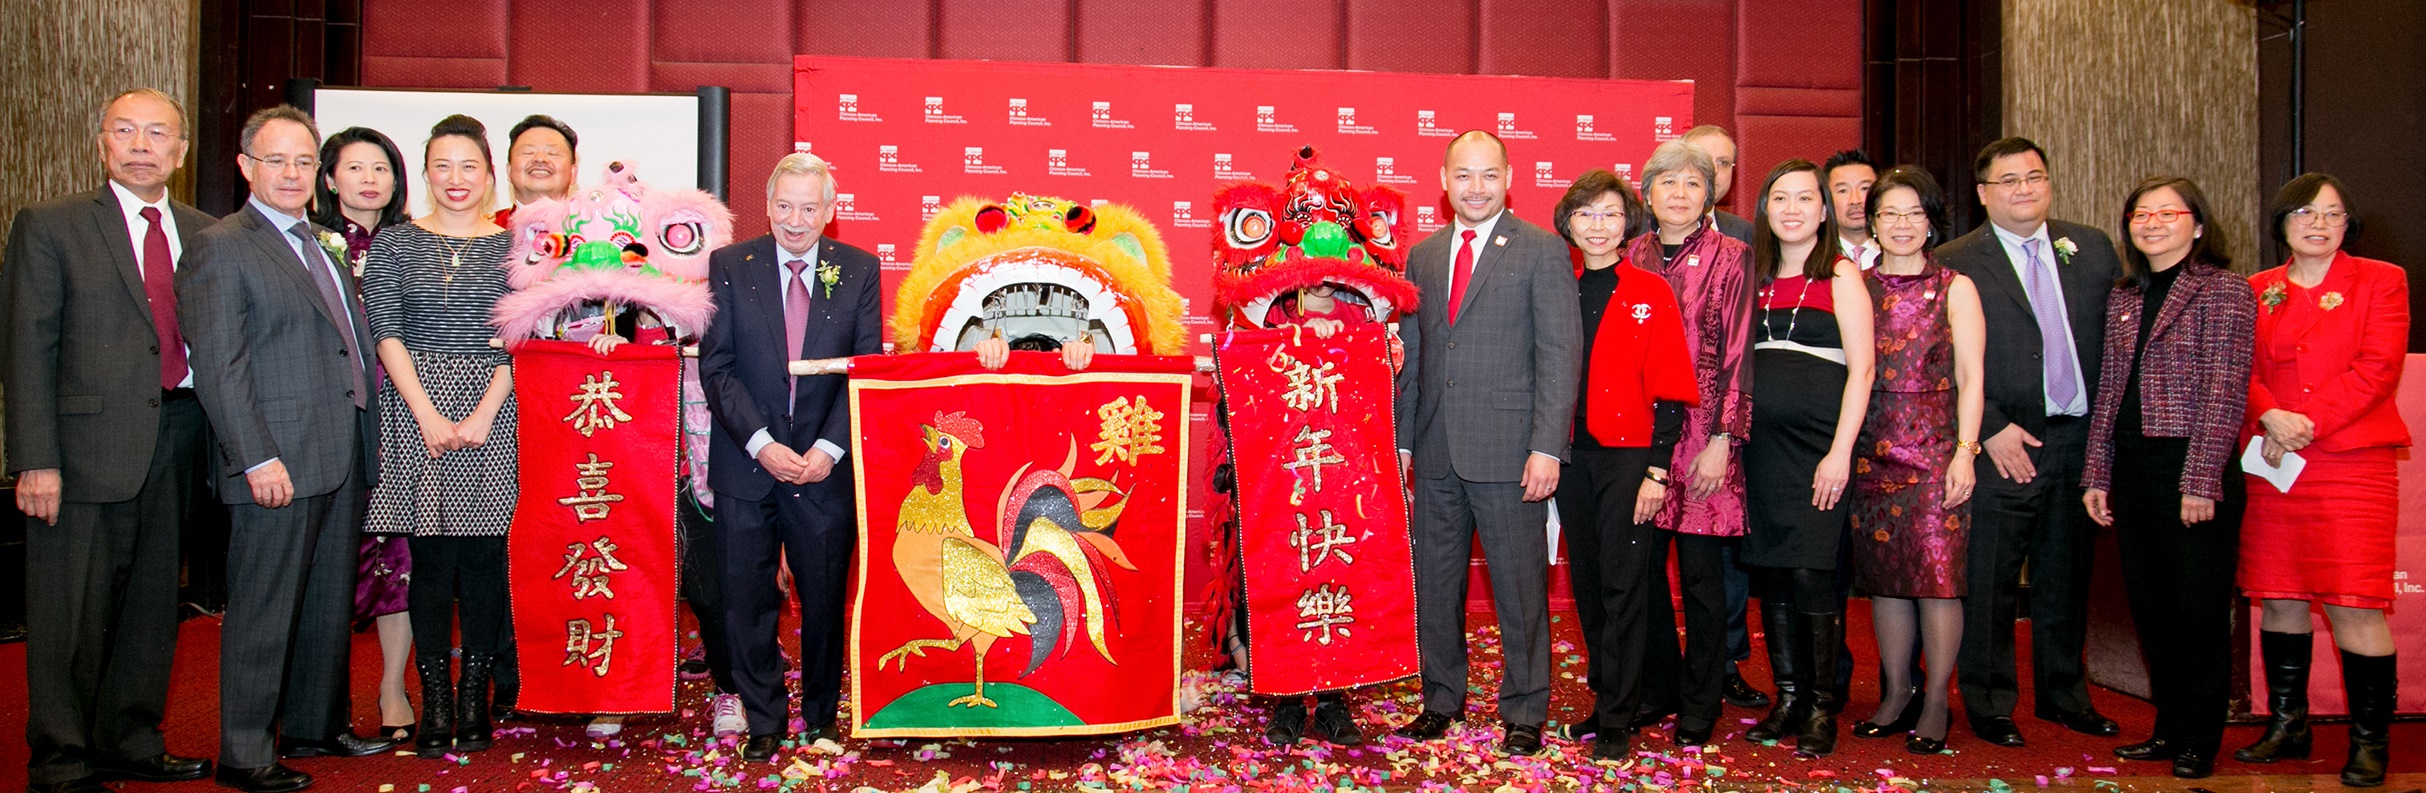 CPC Hosts 52nd Annual Lunar New Year Celebration 